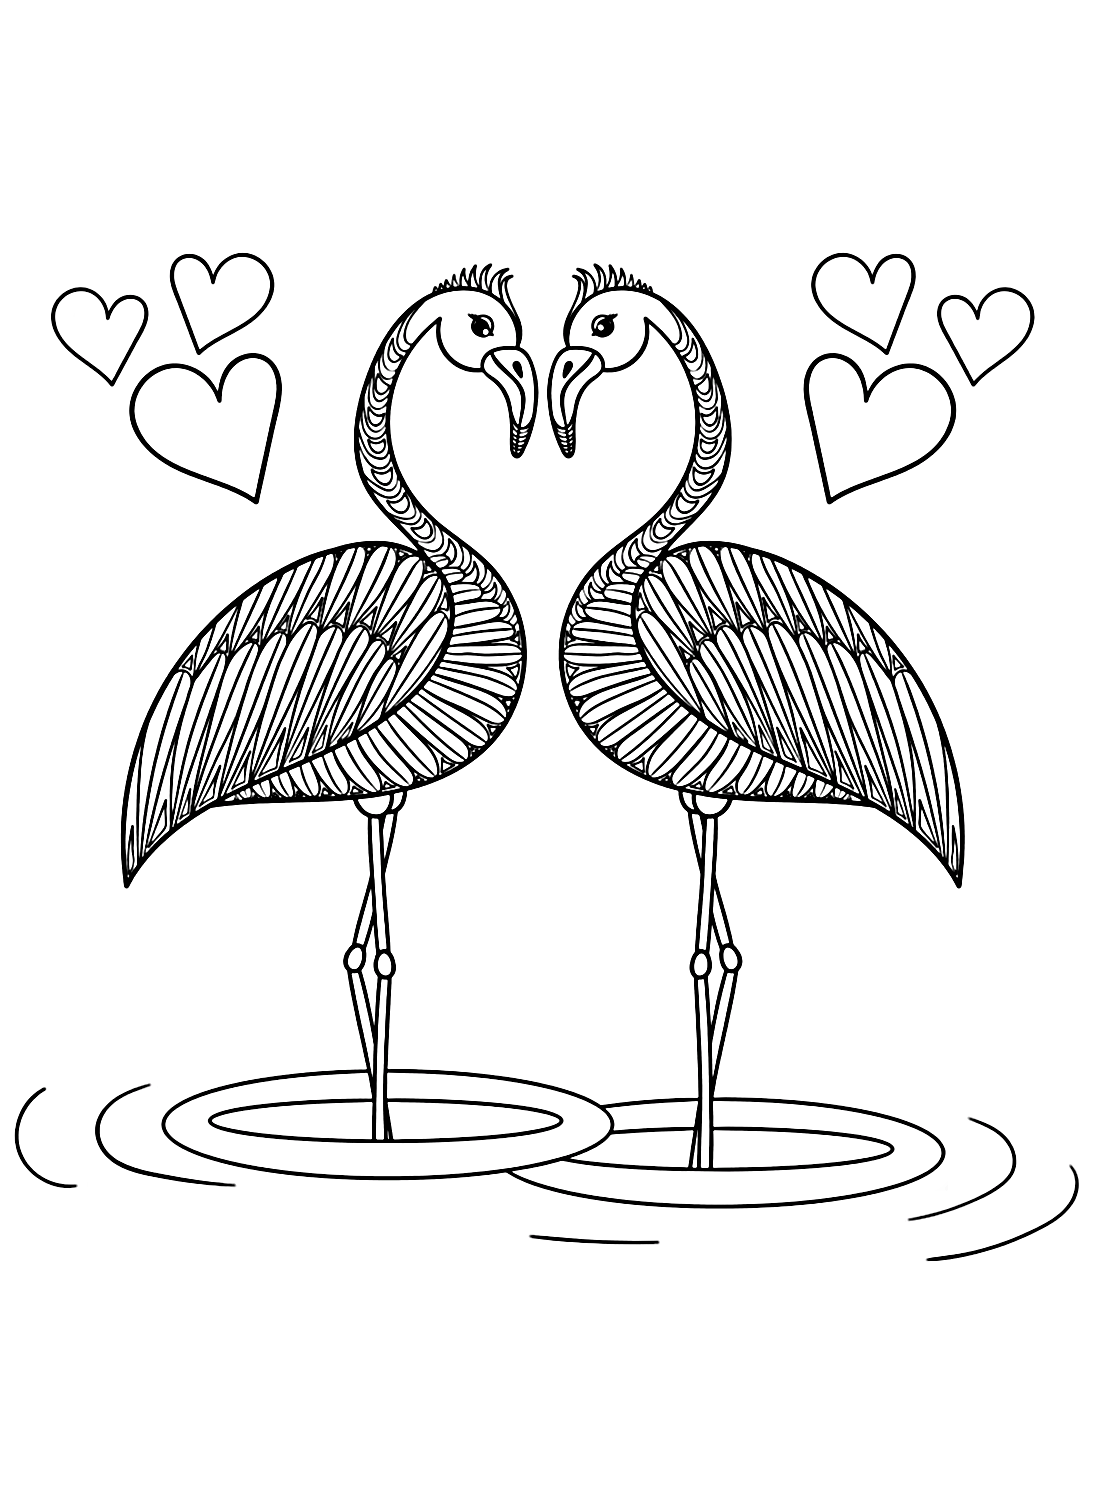 Two Flamingo in Love Coloring Pages